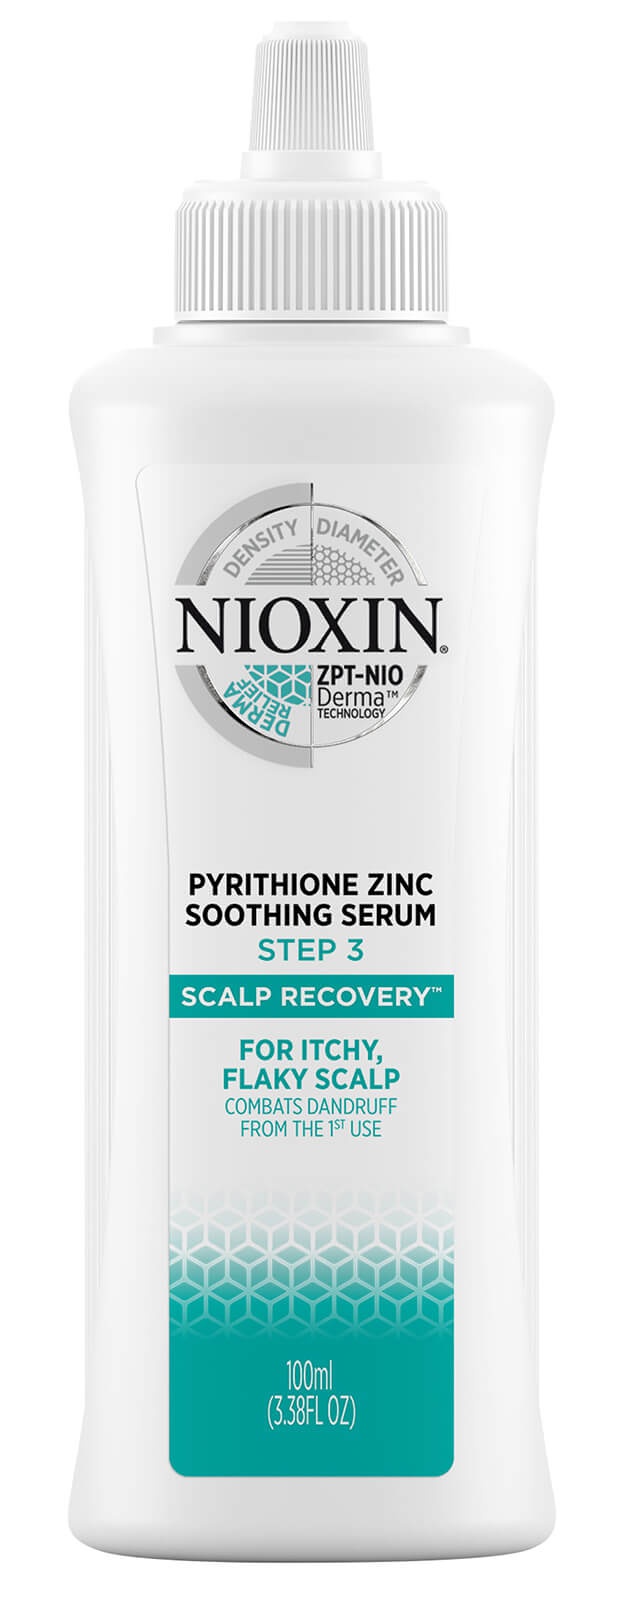 Nioxin Scalp Recovery Soothing Serum Zinc Pyrithione